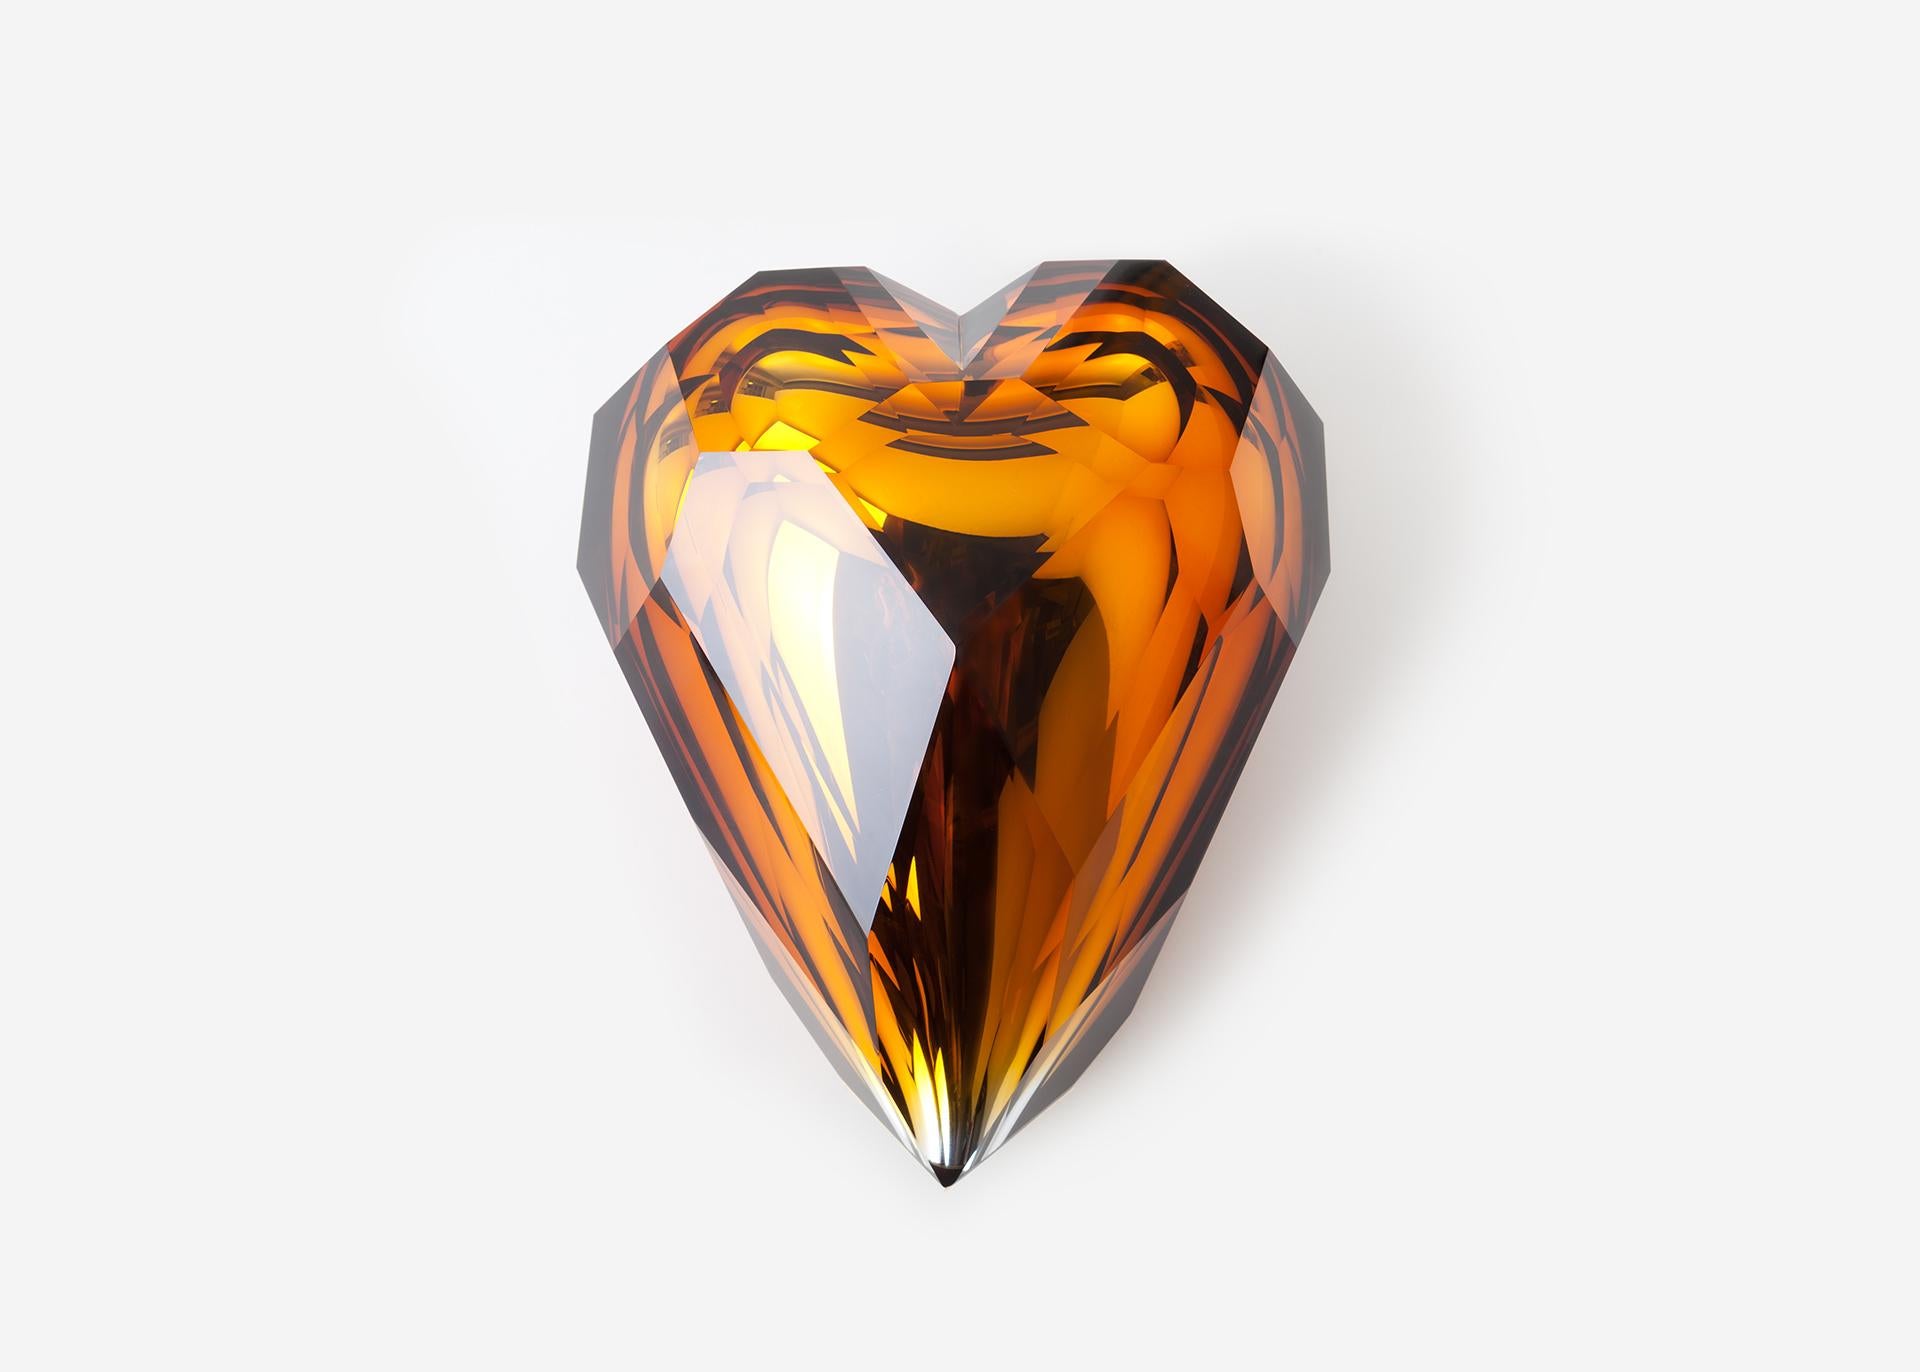 Golden heart by Dechem Studio.
Dimensions: H 29 cm.
Materials: glass, brass.

This glass piece combines the soft shape of a coloured hand blown heart with an angular hand-faceted finishing. These contrasting features give it a multilayered